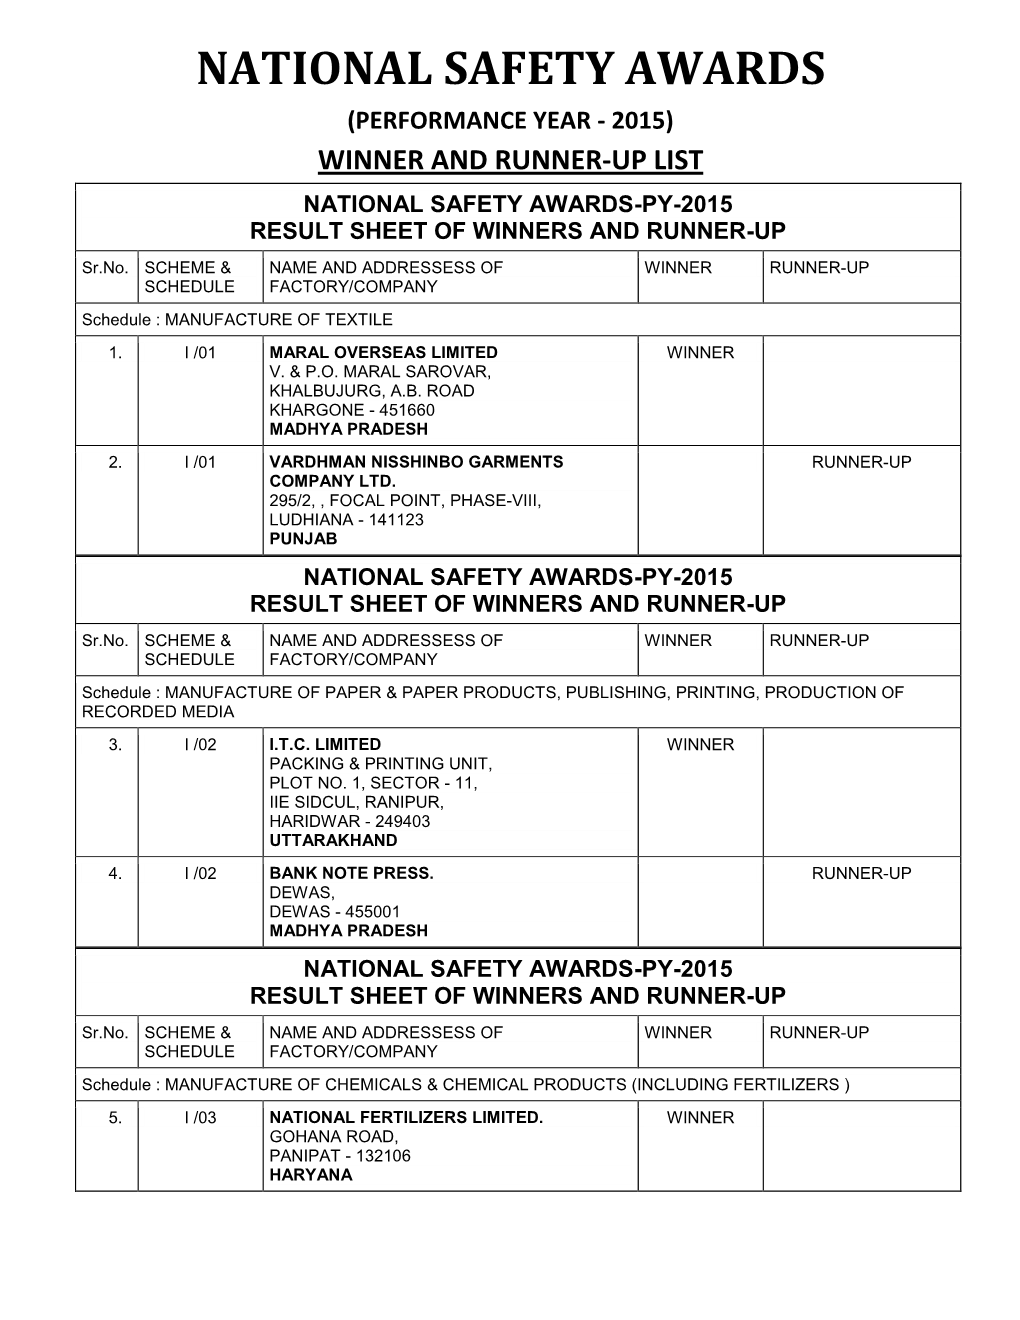 NATIONAL SAFETY AWARDS (PERFORMANCE YEAR - 2015) WINNER and RUNNER-UP LIST NATIONAL SAFETY AWARDS-PY-2015 RESULT SHEET of WINNERS and RUNNER-UP Sr.No